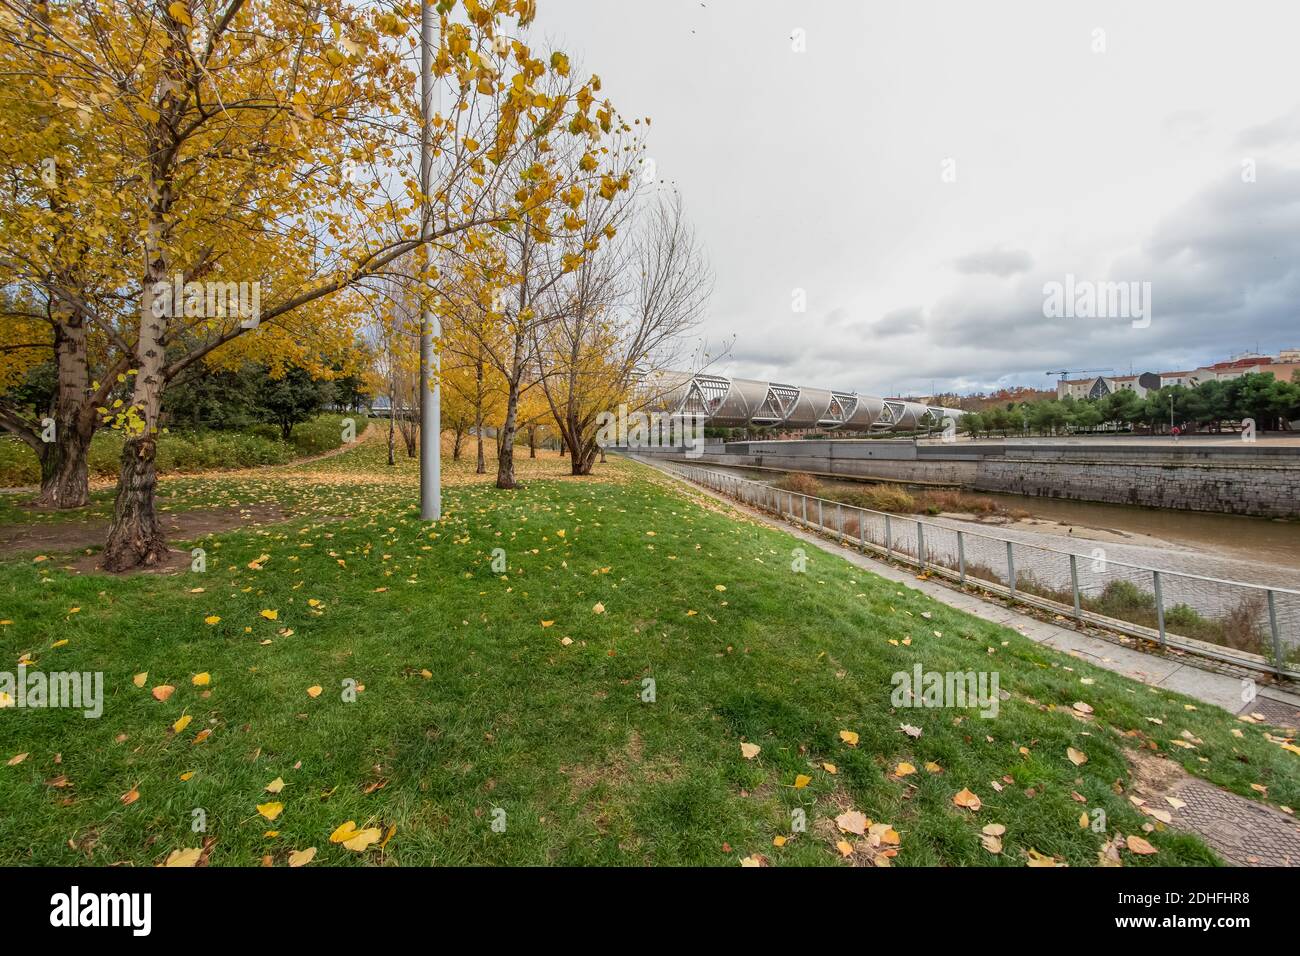 Colourful autumn trees with yellow leafs in the Madrid Rio, the park of the Manzanares River in Madrid, Spain. Stock Photo